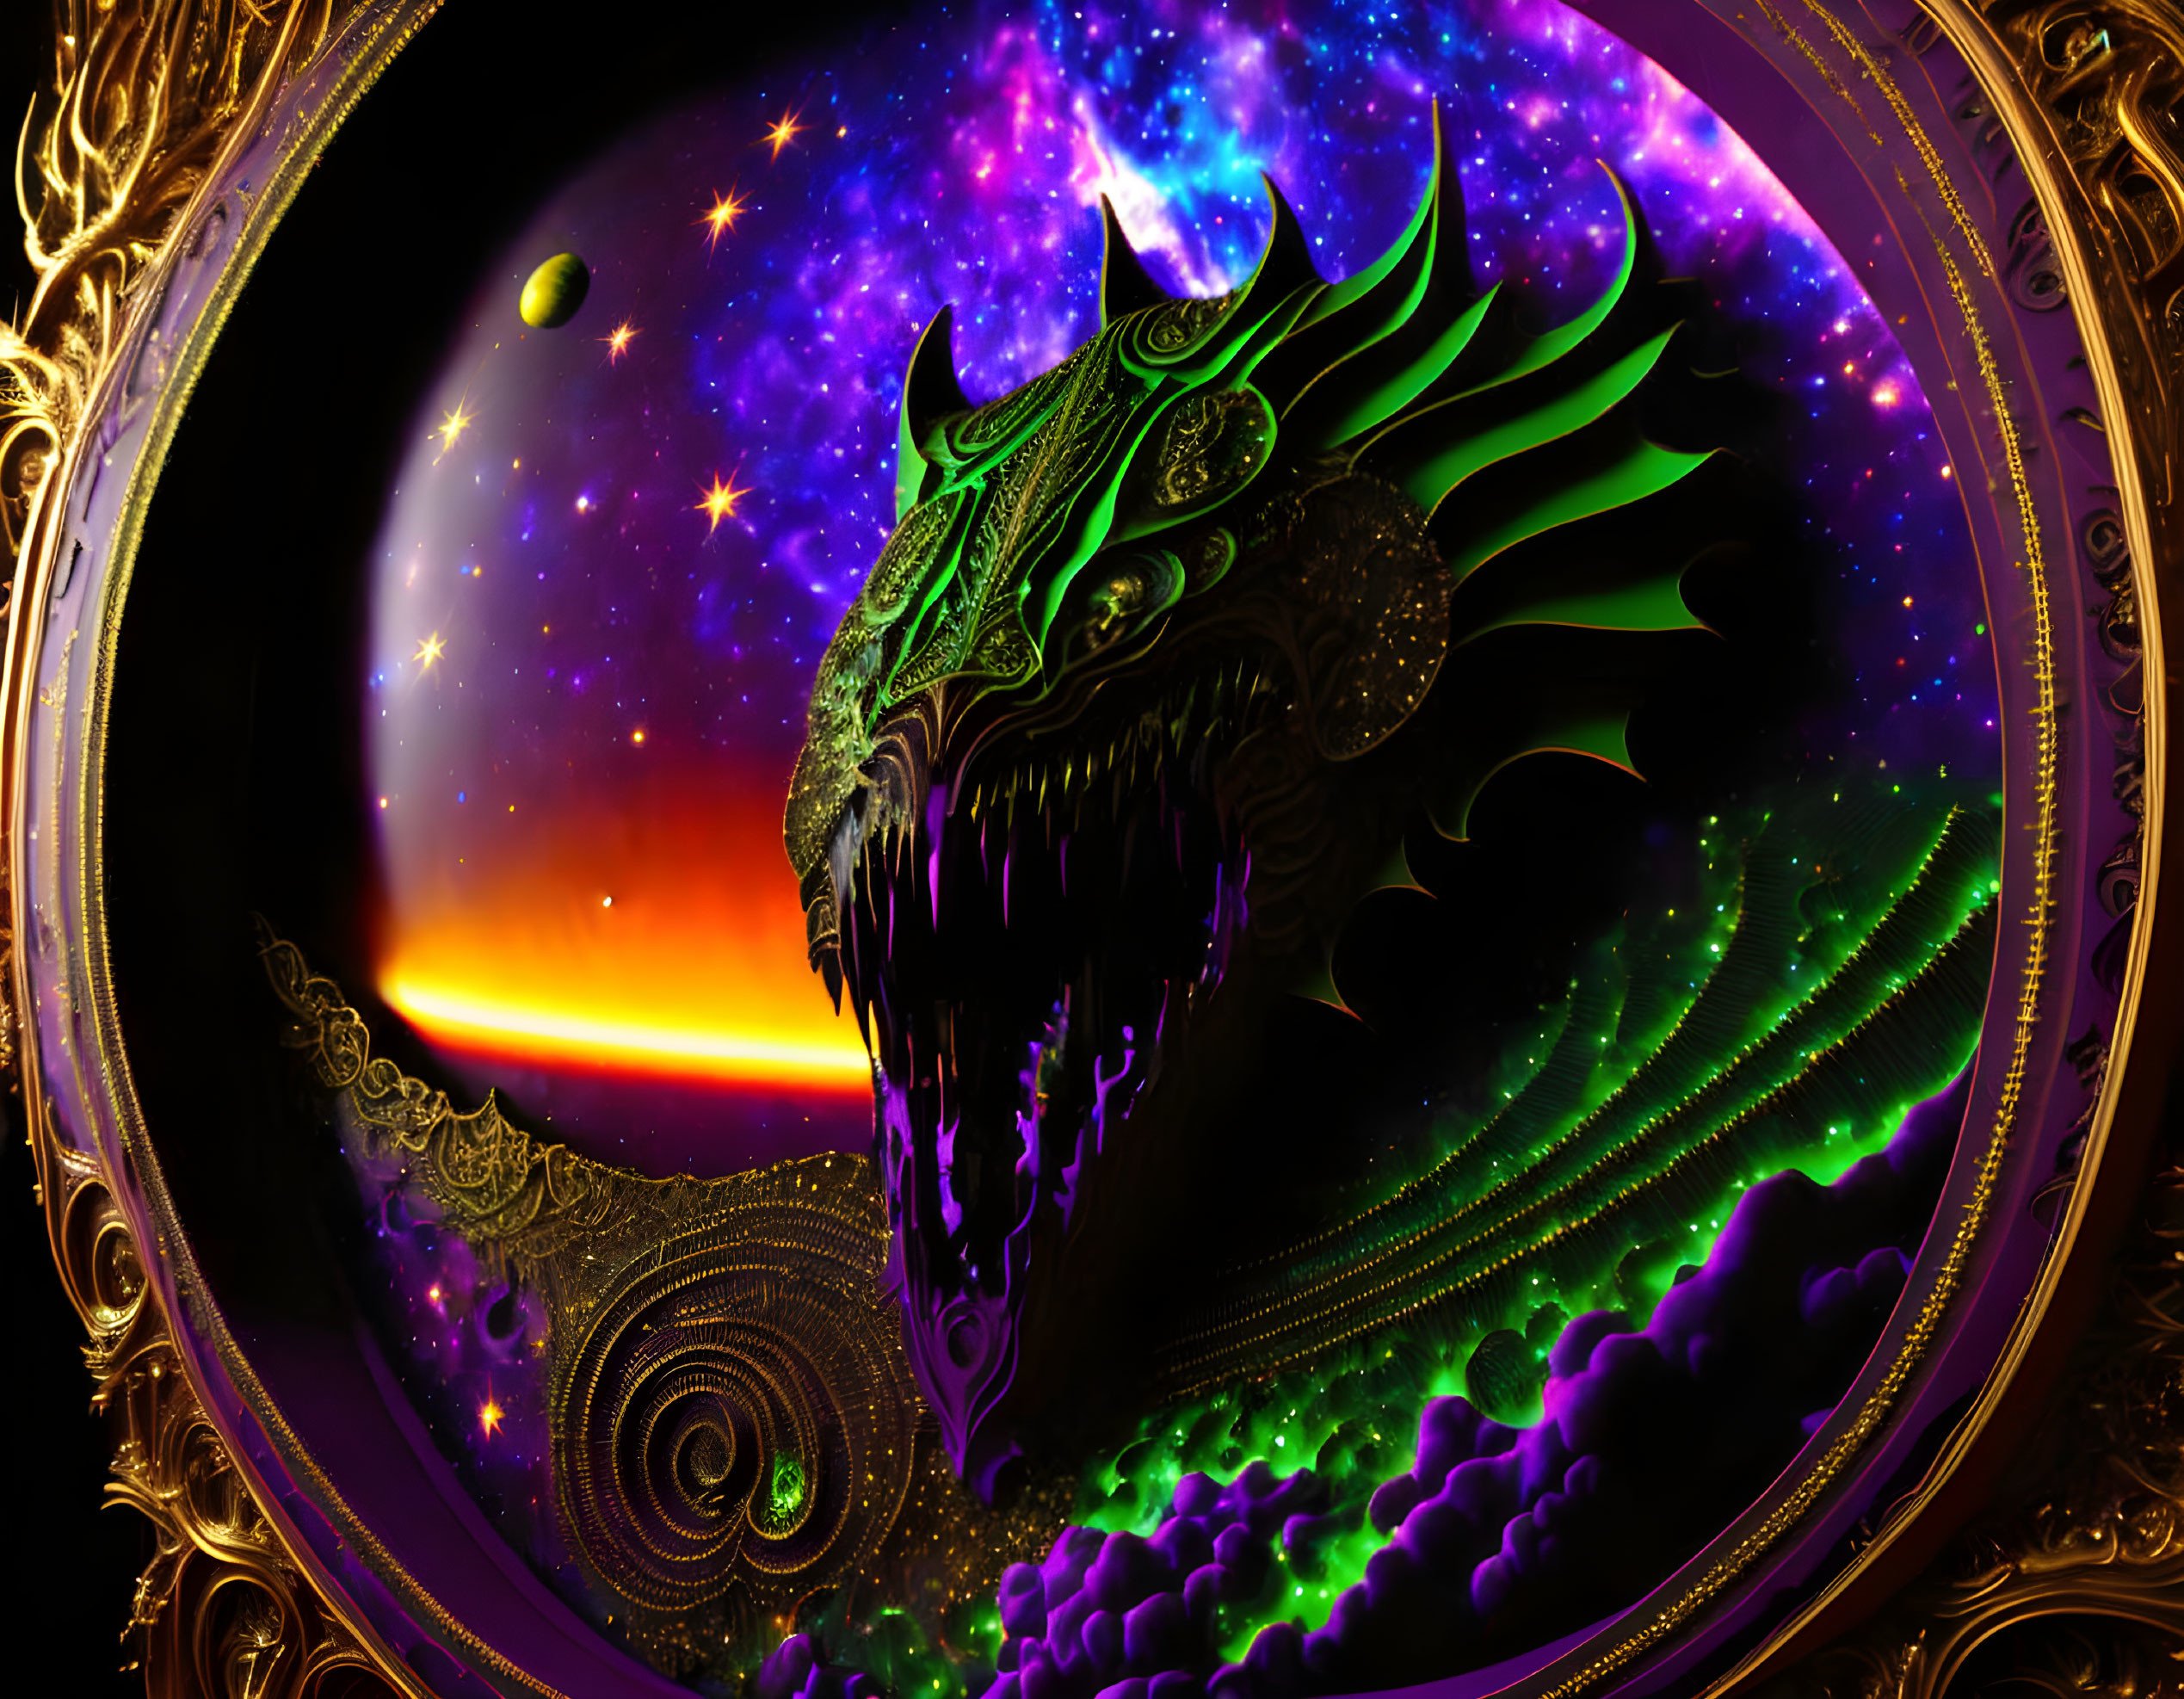 Colorful dragon head in galaxy with sunset background and gold frame